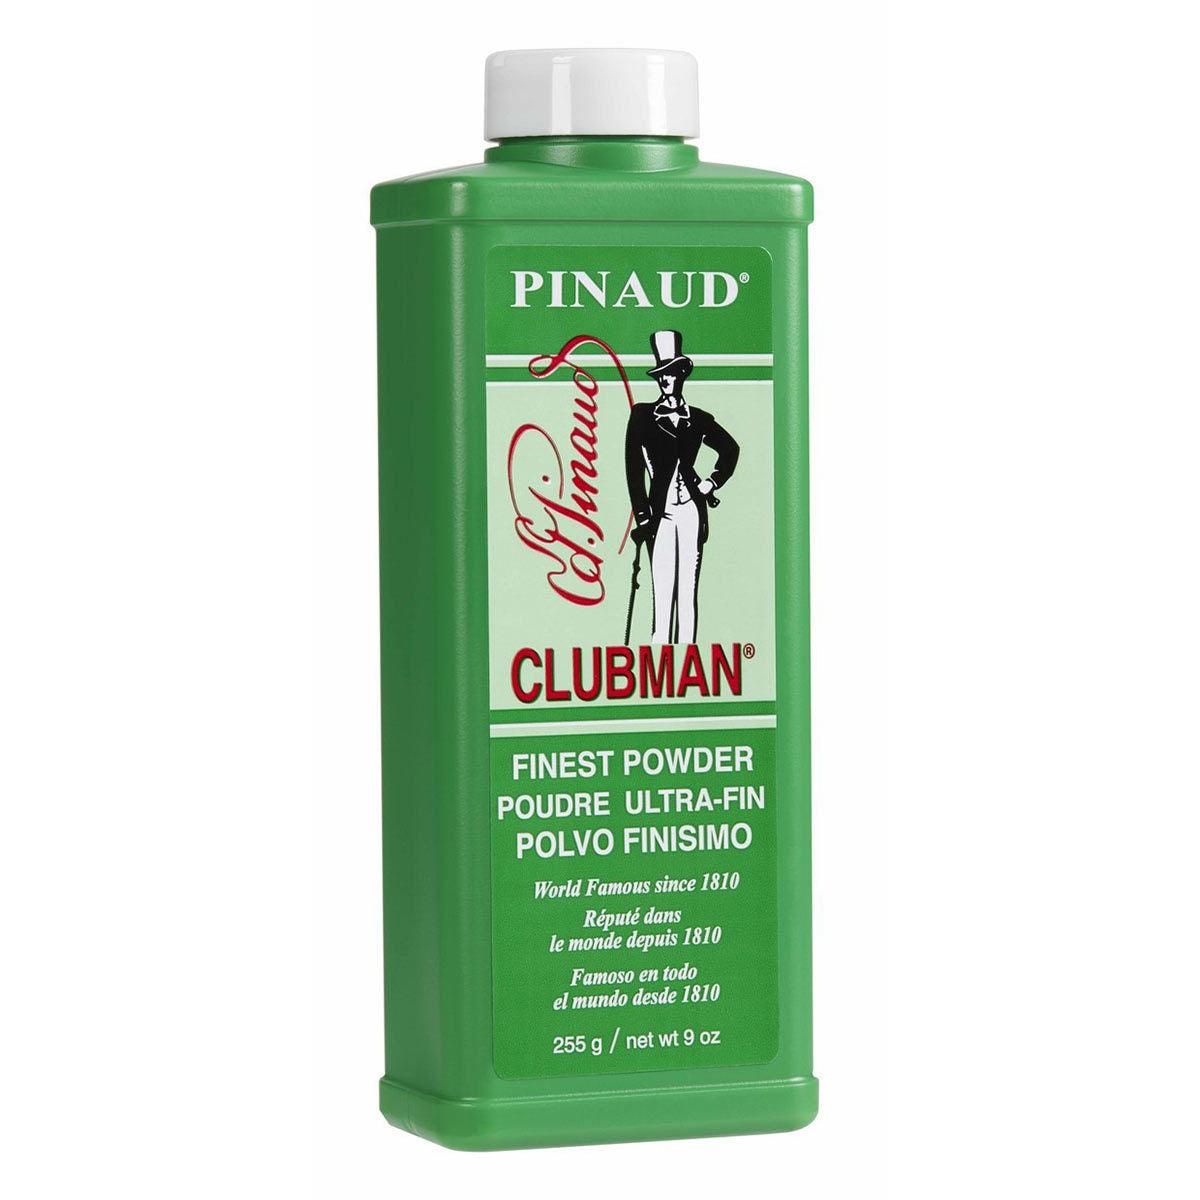 Primary image of Clubman Powder